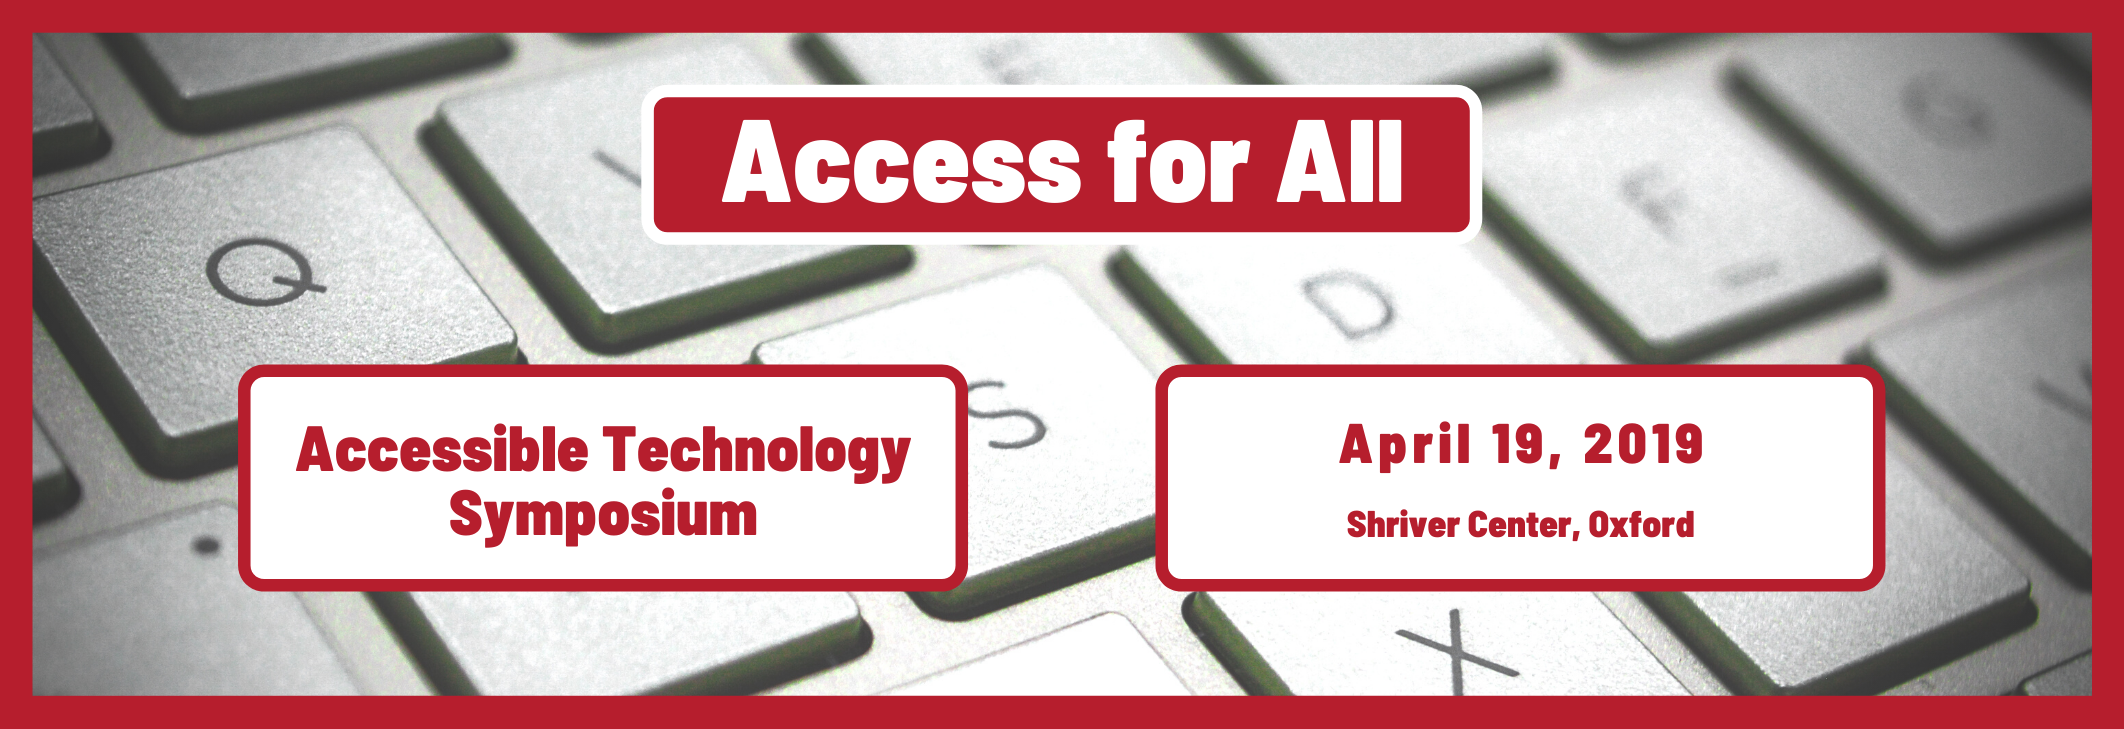 Access for All April 19, 2019 